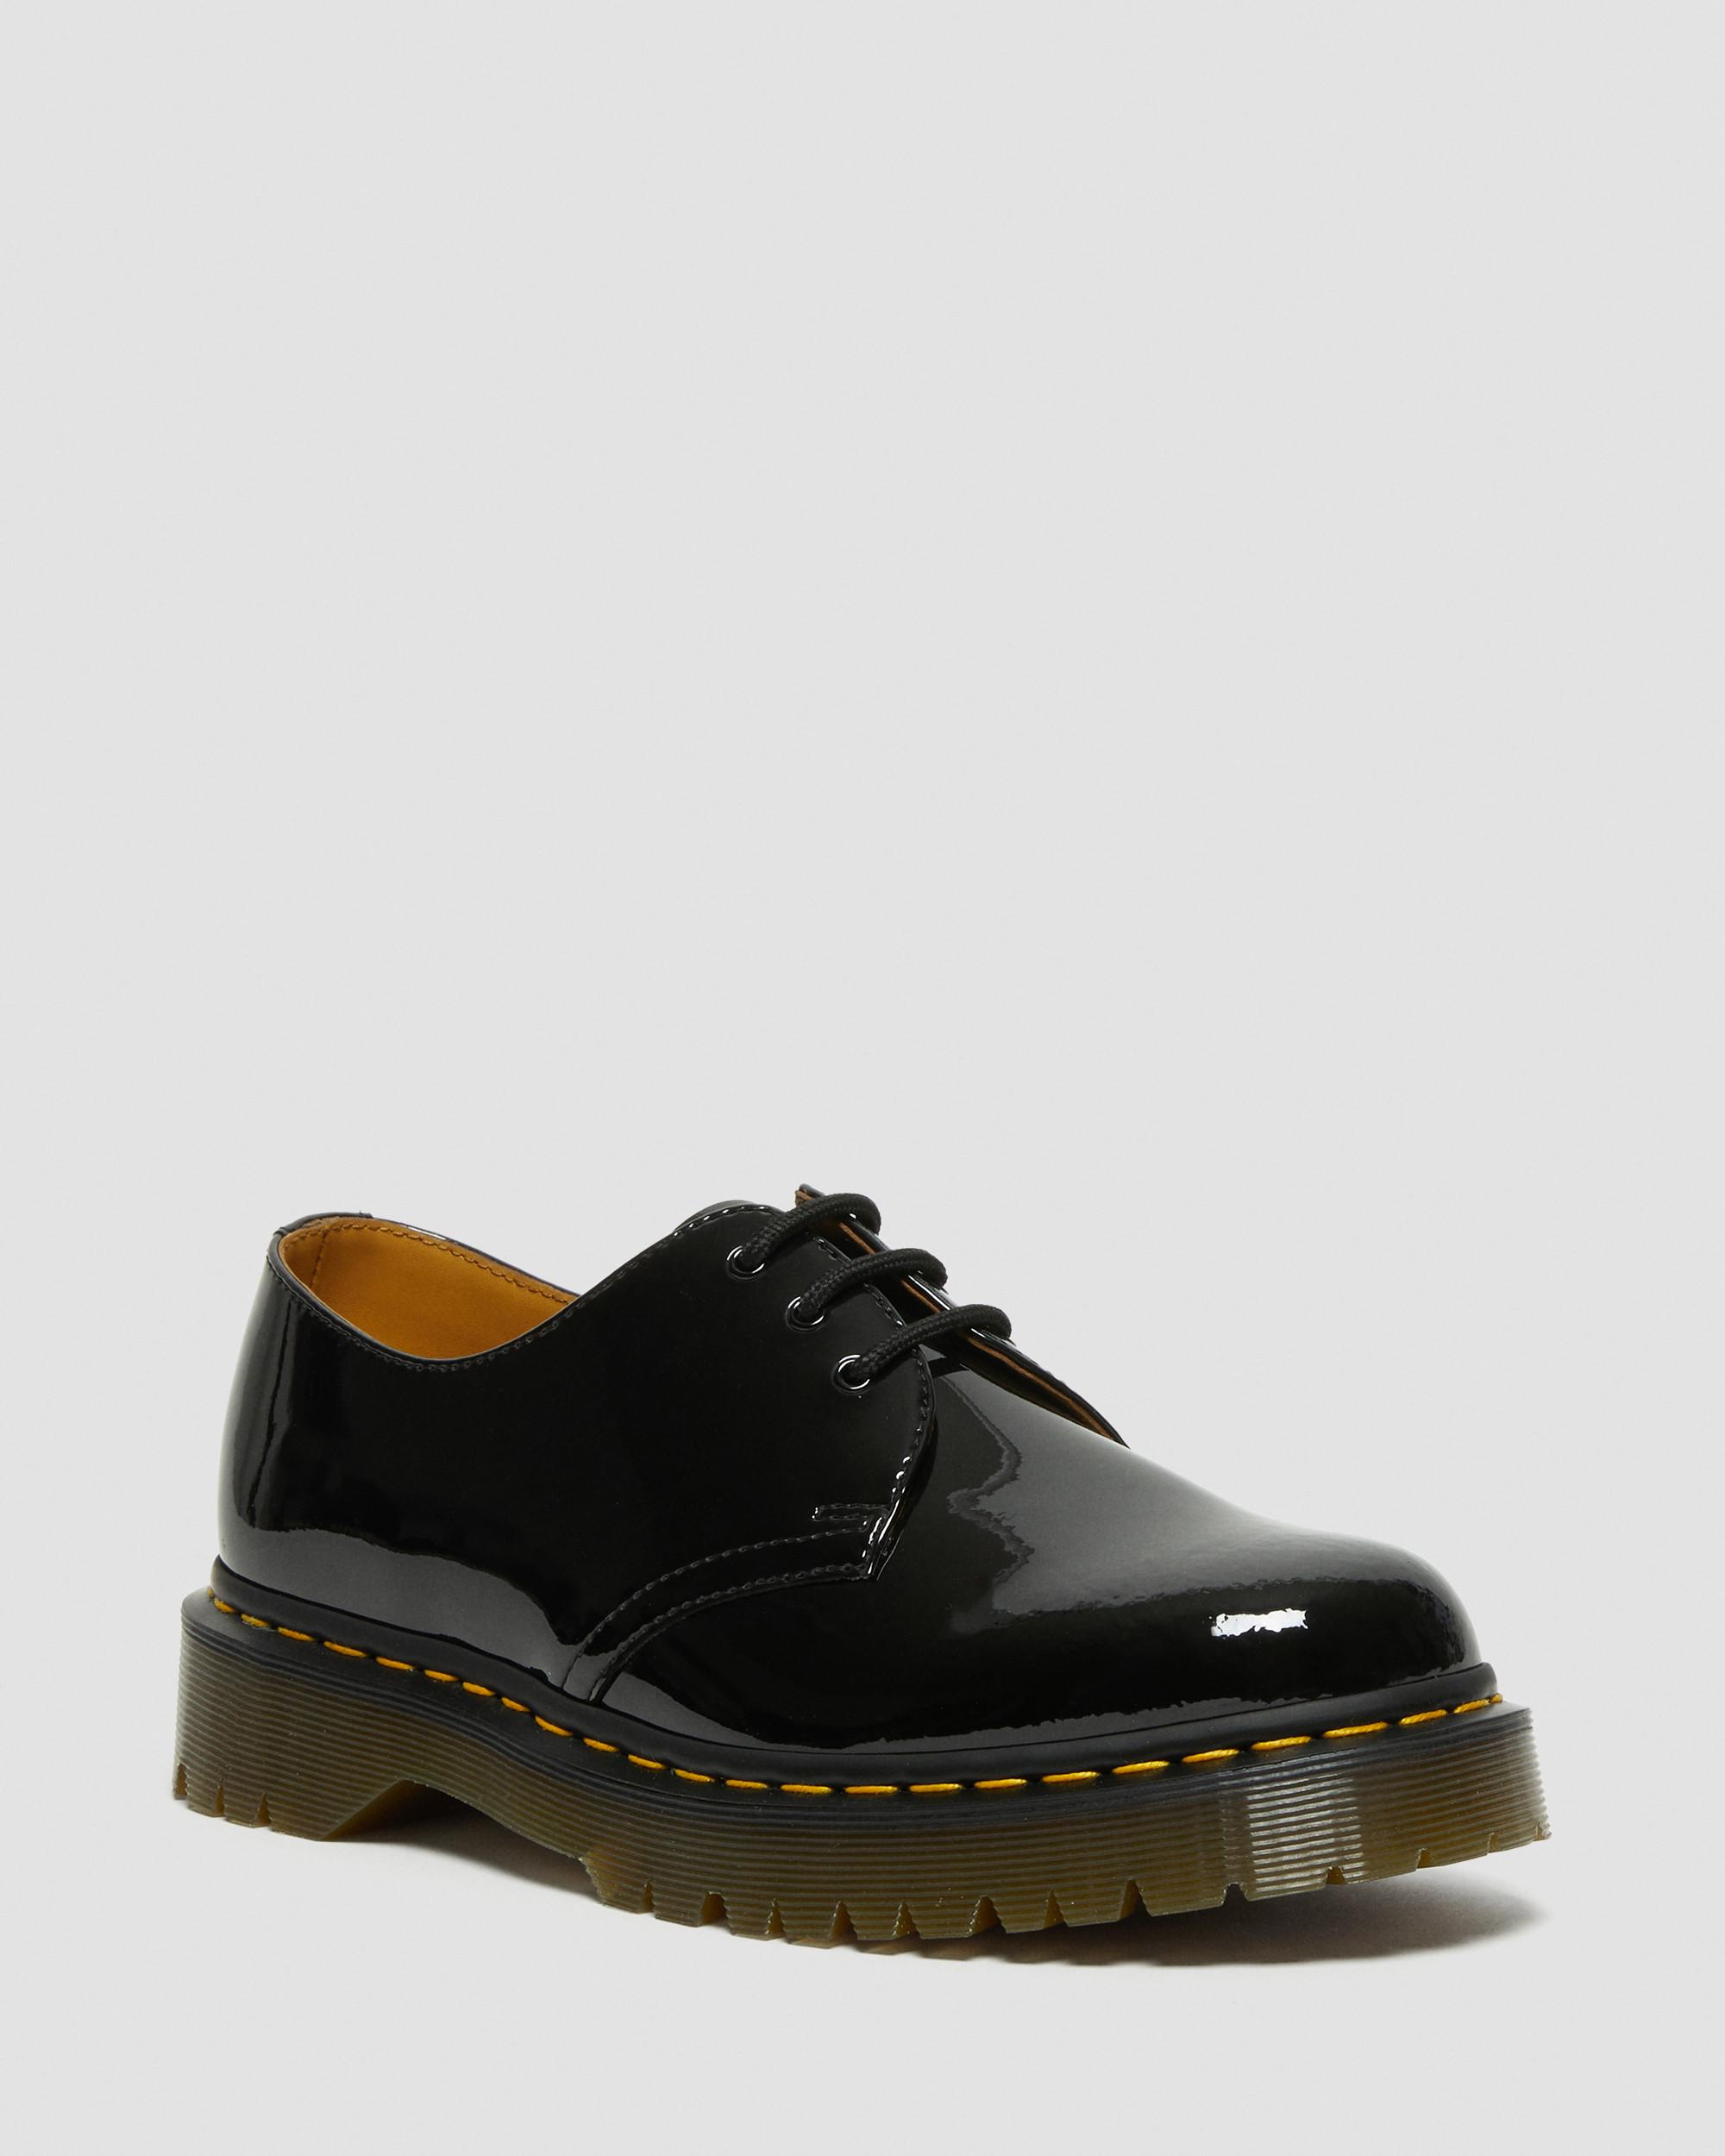 1461 Bex Patent Leather Oxford Shoes in Black | Dr. Martens